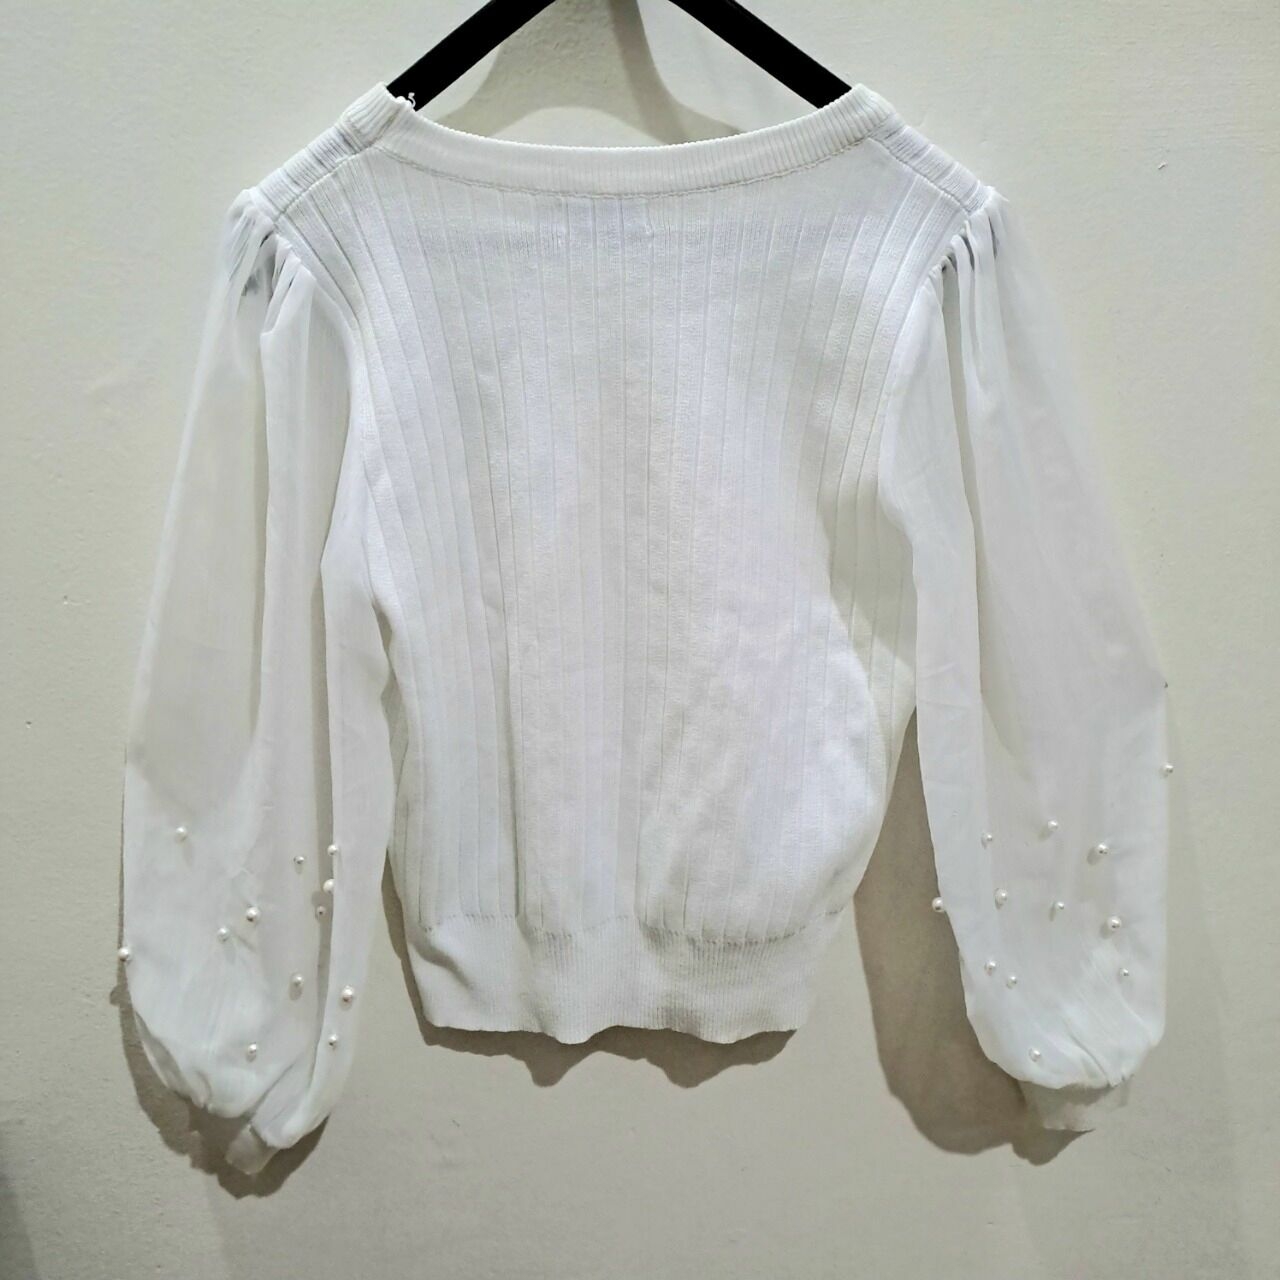 New. Valley Girl Knit Pearly Puffy Sleeves Blouse